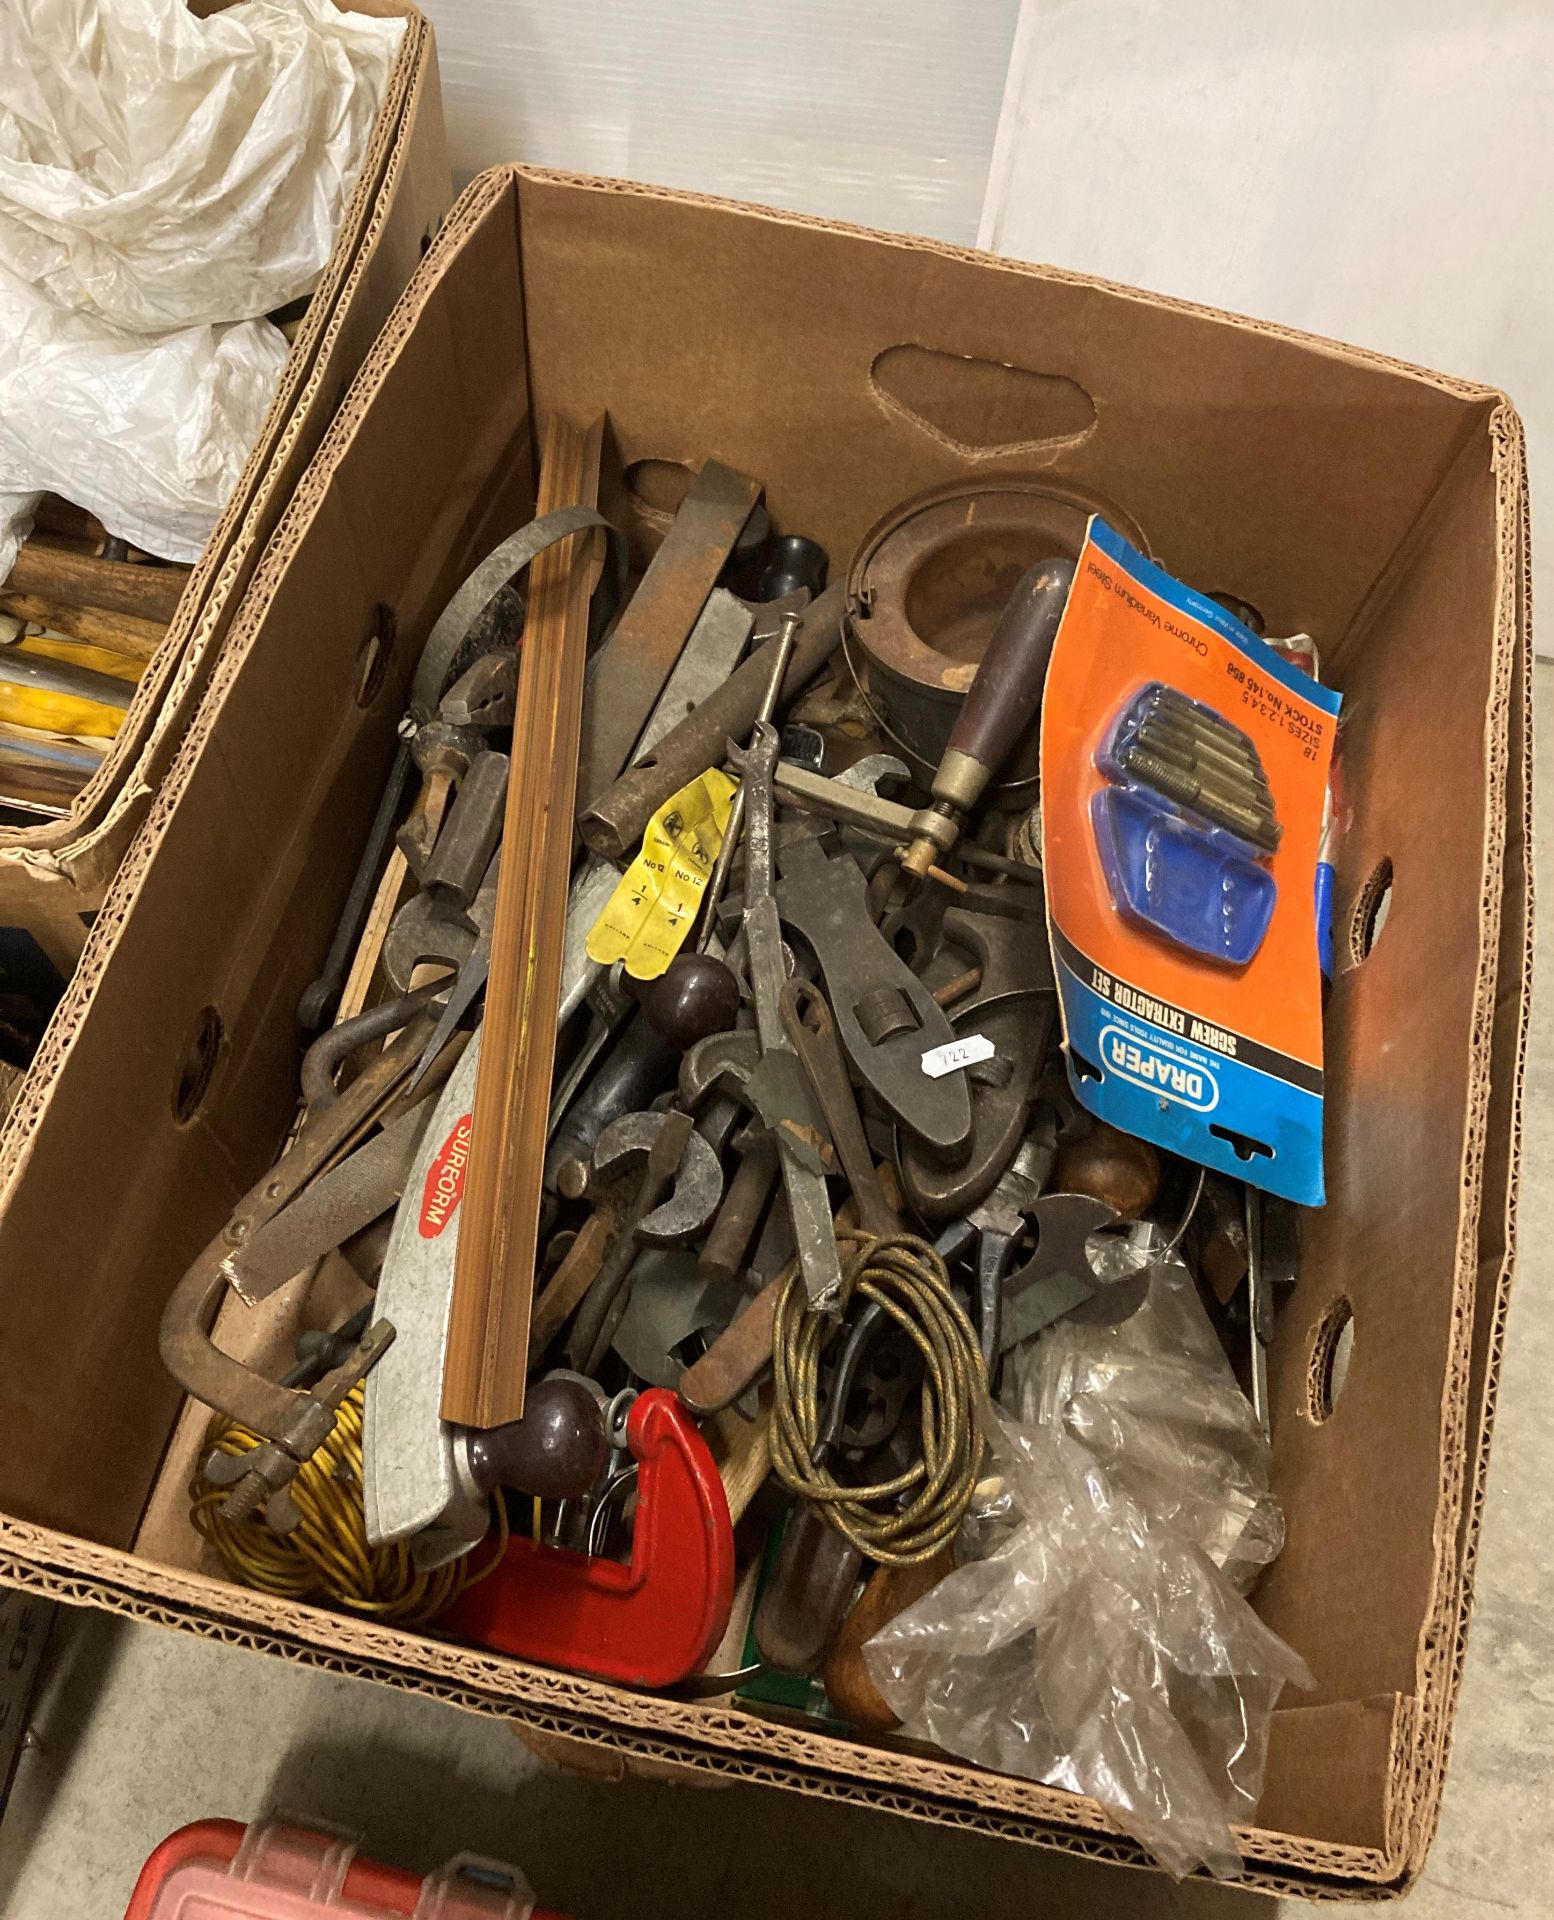 Contents to 3 x boxes - assorted hand tools including hammers, socket sets, spanners, - Image 2 of 3